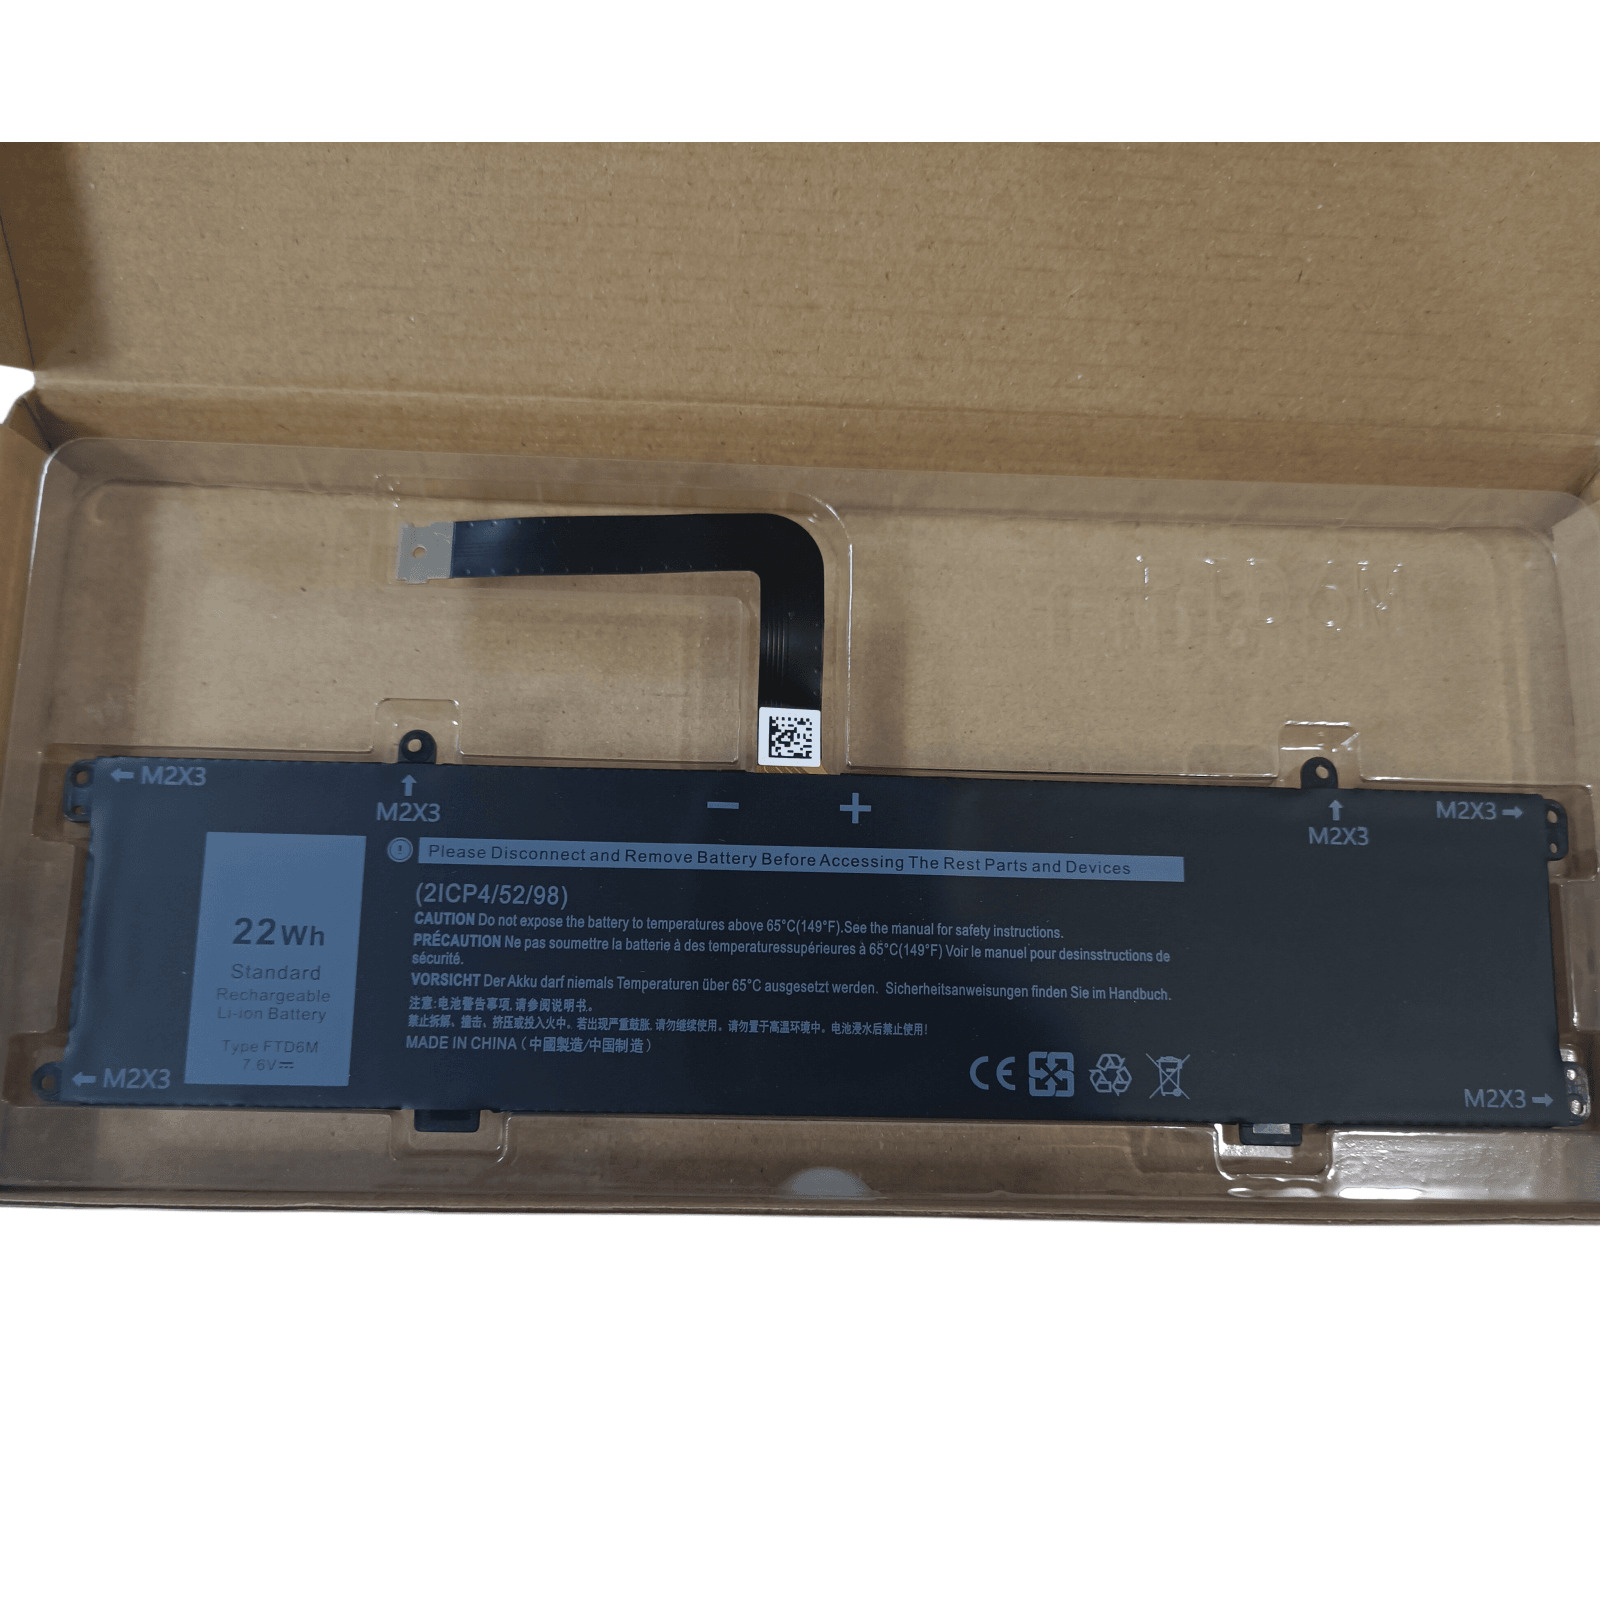 New FTD6M 6HHW5 2750mAh Battery for Dell Latitude E7285 2-in-1 Keyboard K17M  US